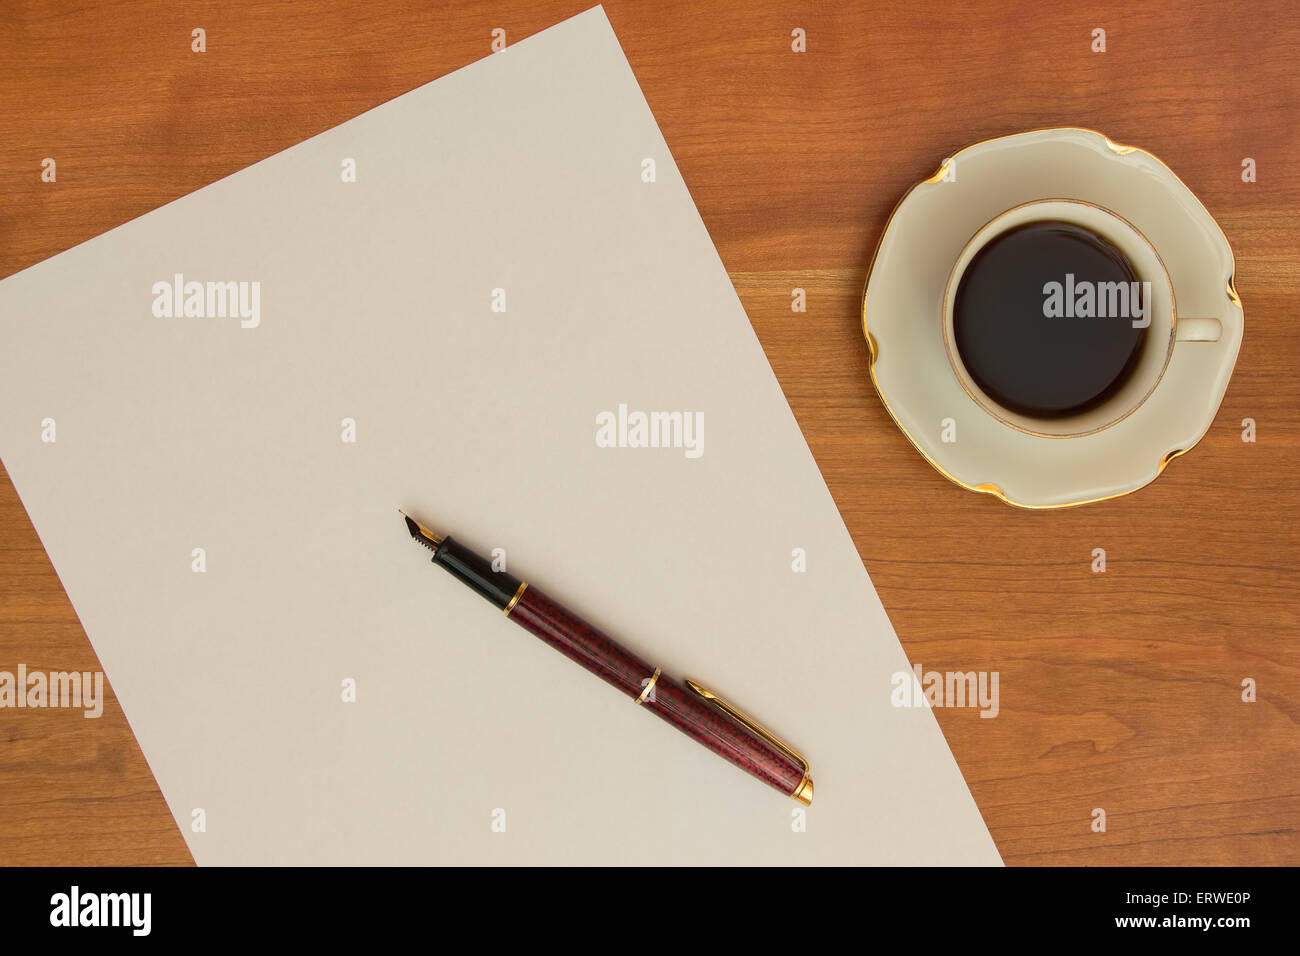 About to write a letter. Pen, white office paper and a cup of black coffee on wooden desk. Stock Photo